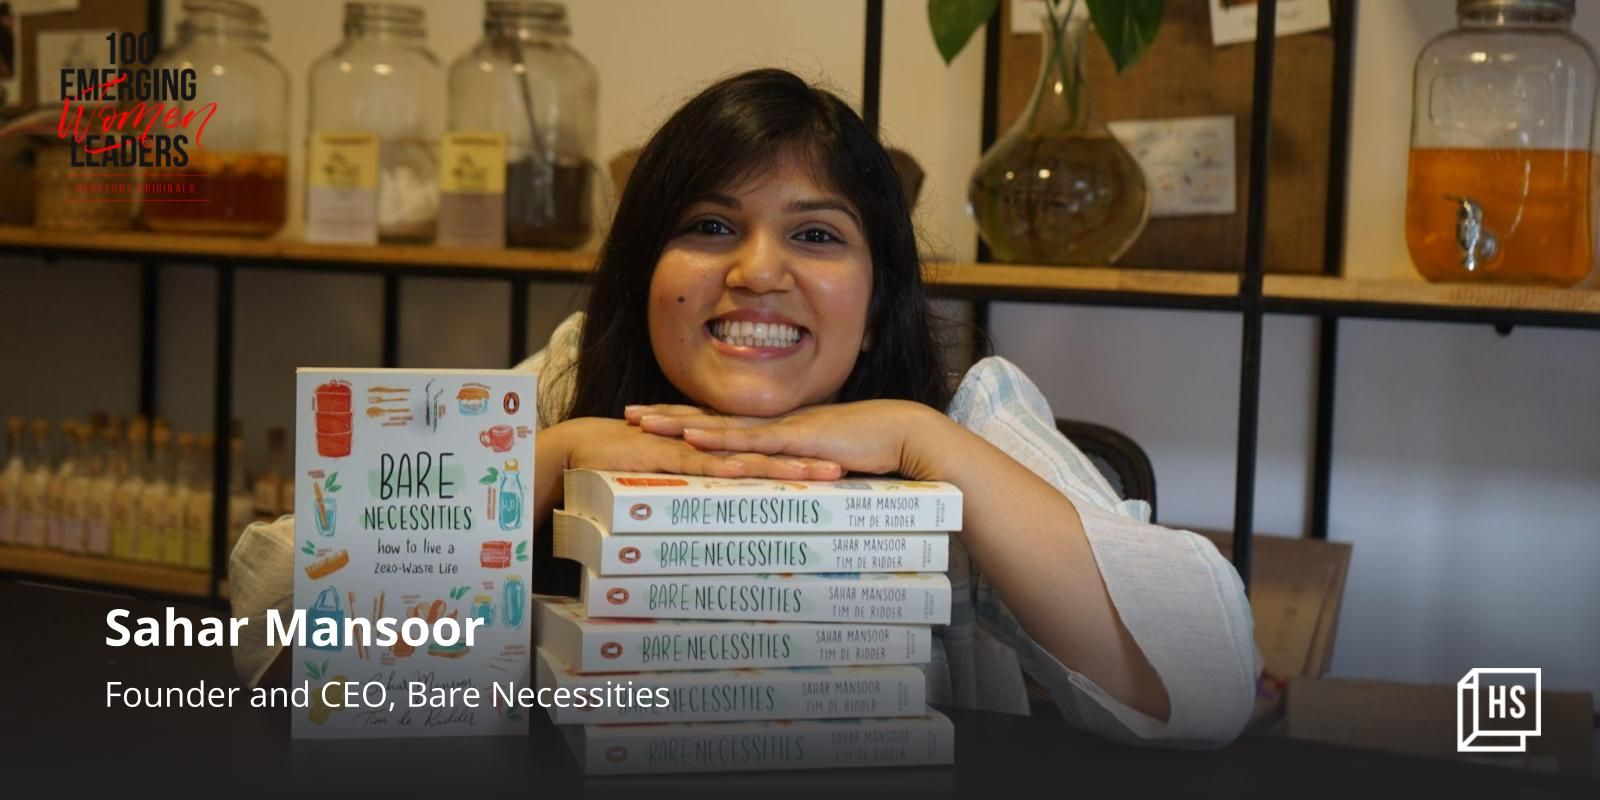 [100 Emerging Women Leaders] Sahar Mansoor is on a mission to ensure zero-waste, ethical consumption 
